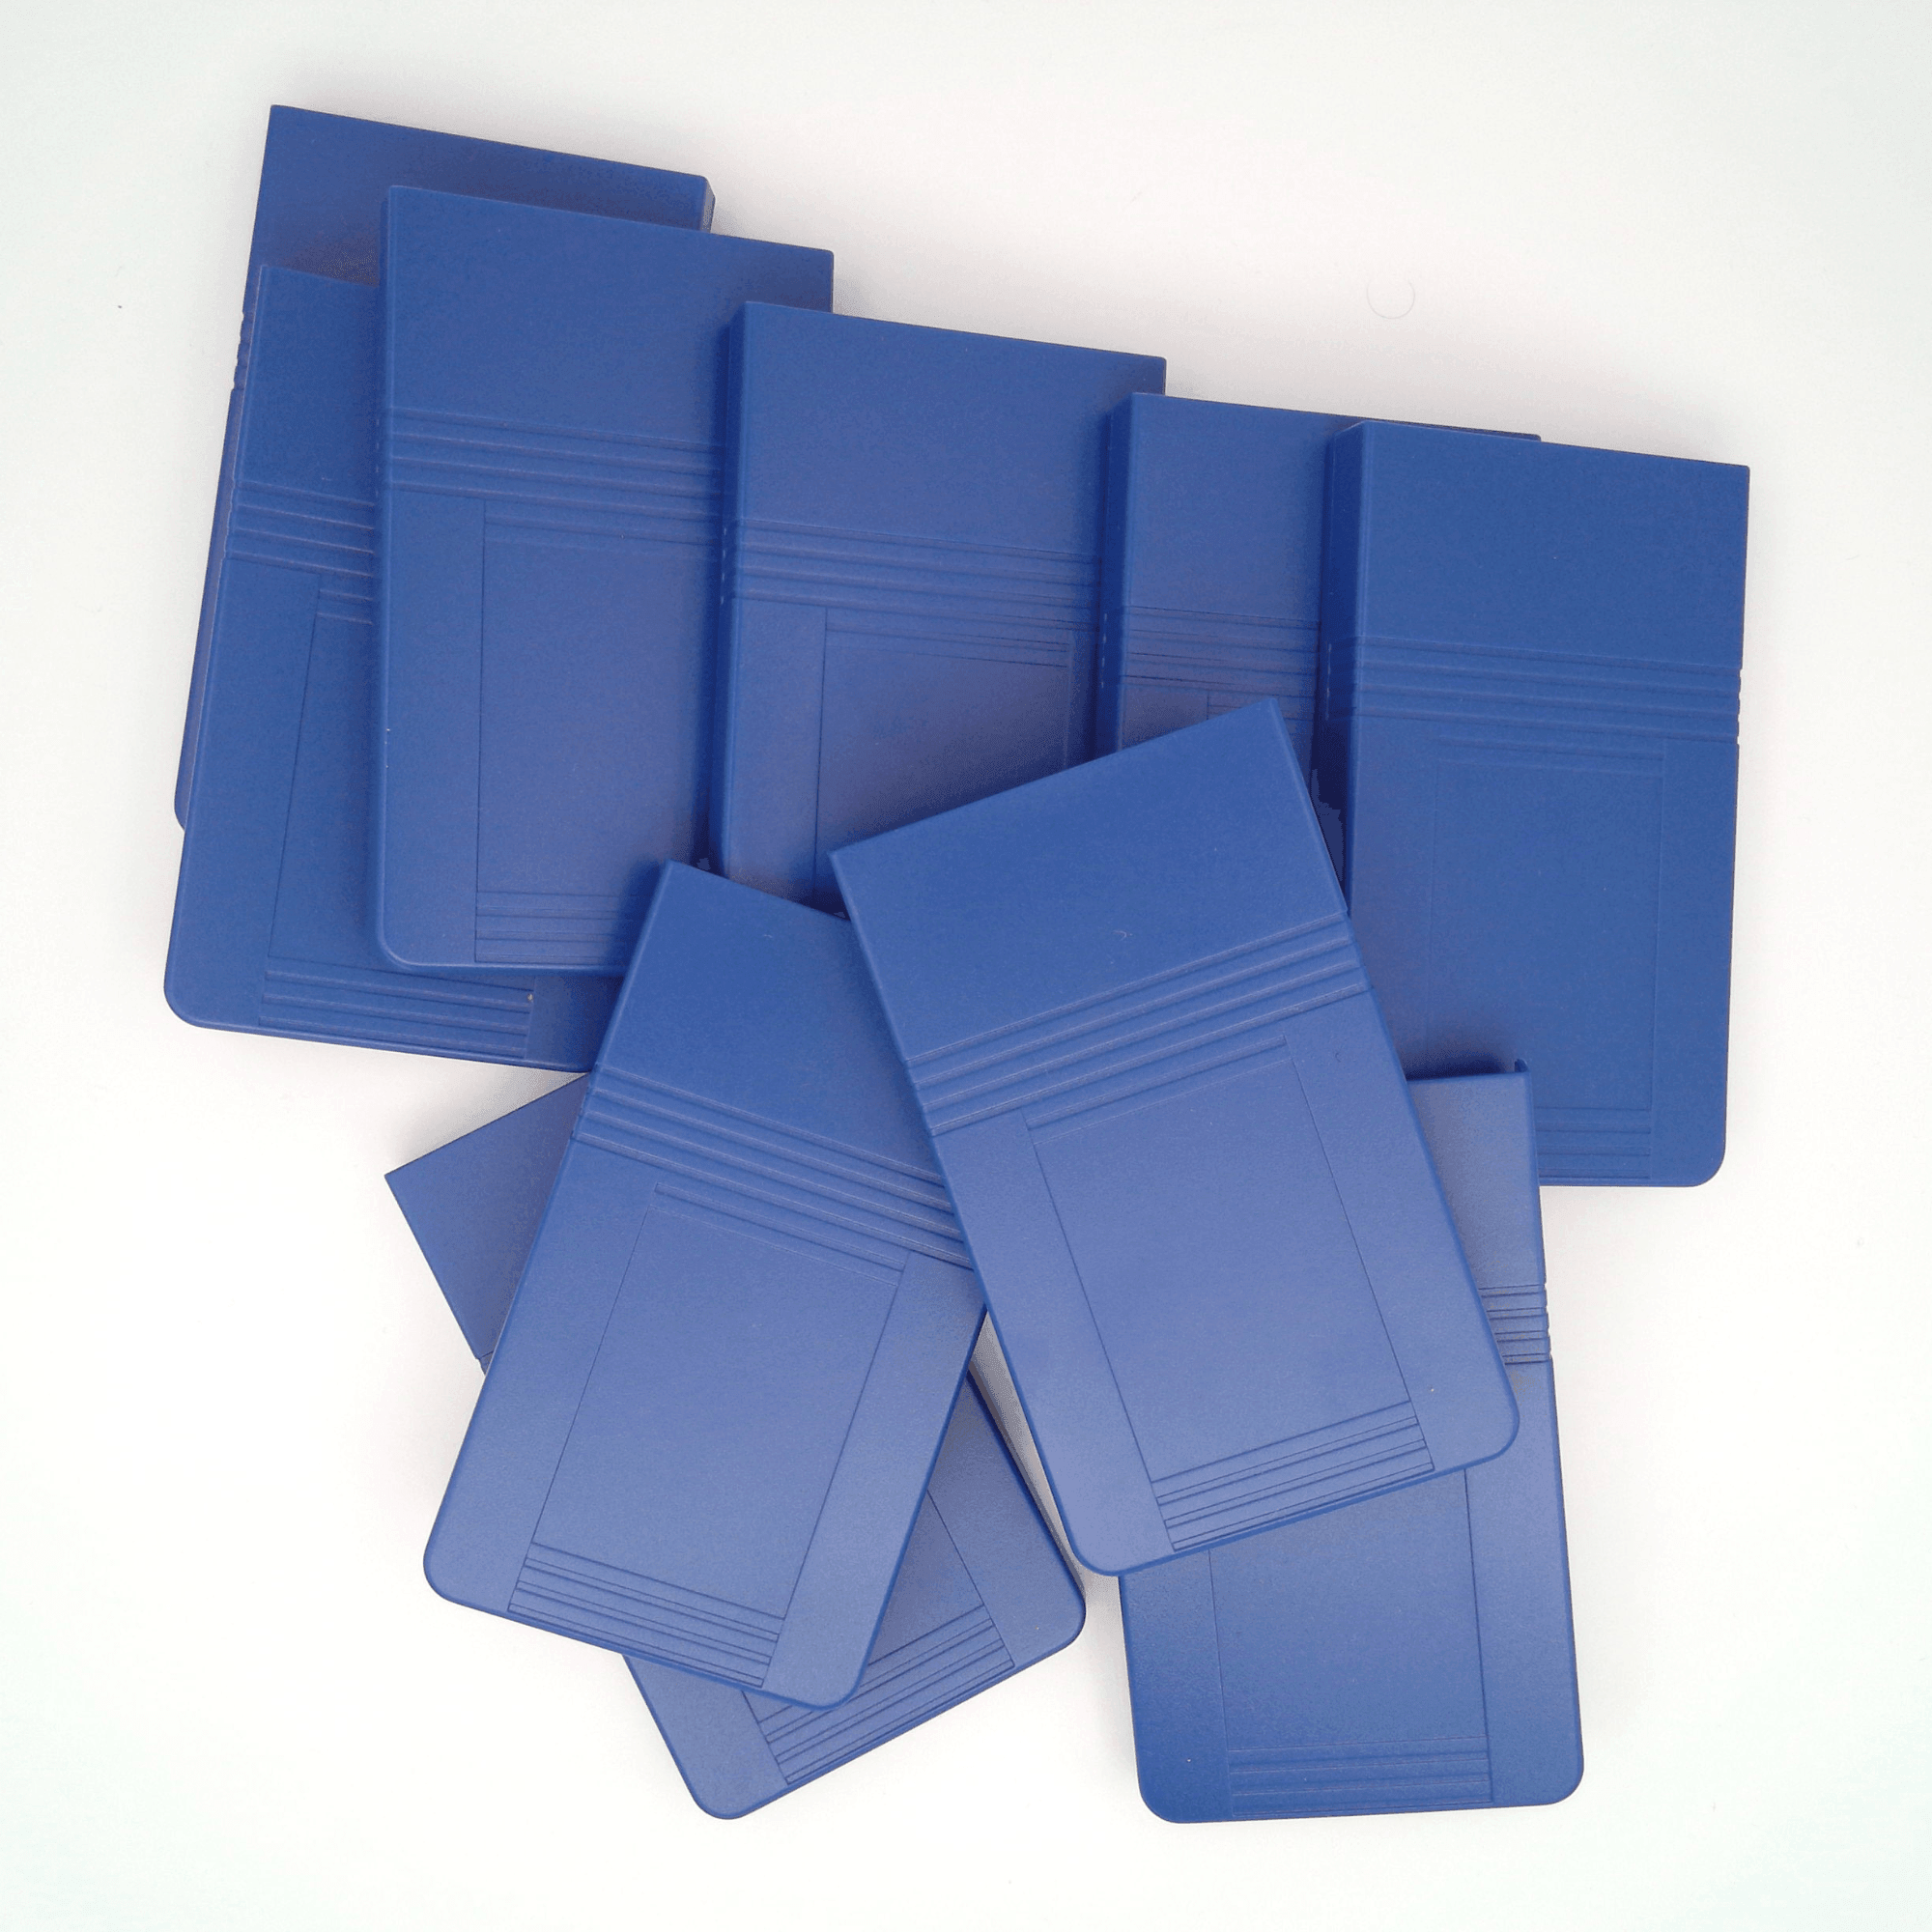 Pack of 10 Ti-108 Slide Covers - Underwood Distributing Co.